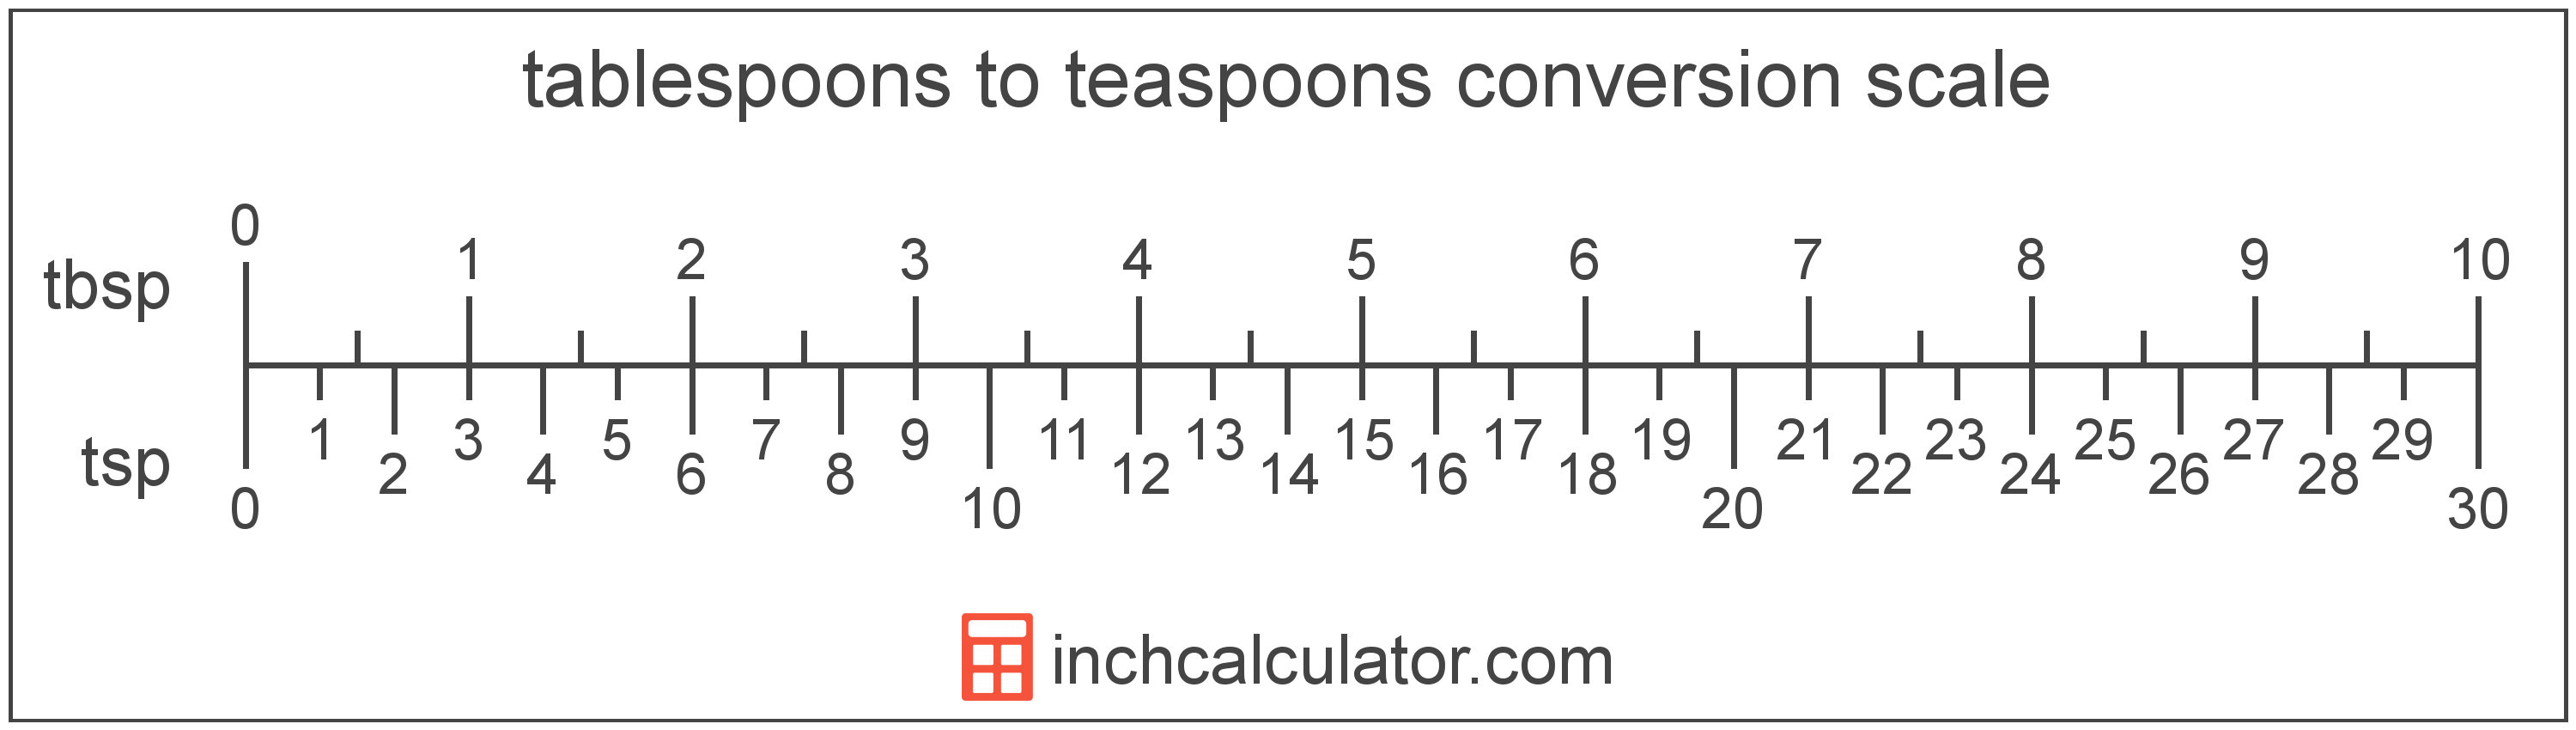 conversion scale showing teaspoons and equivalent tablespoons volume values